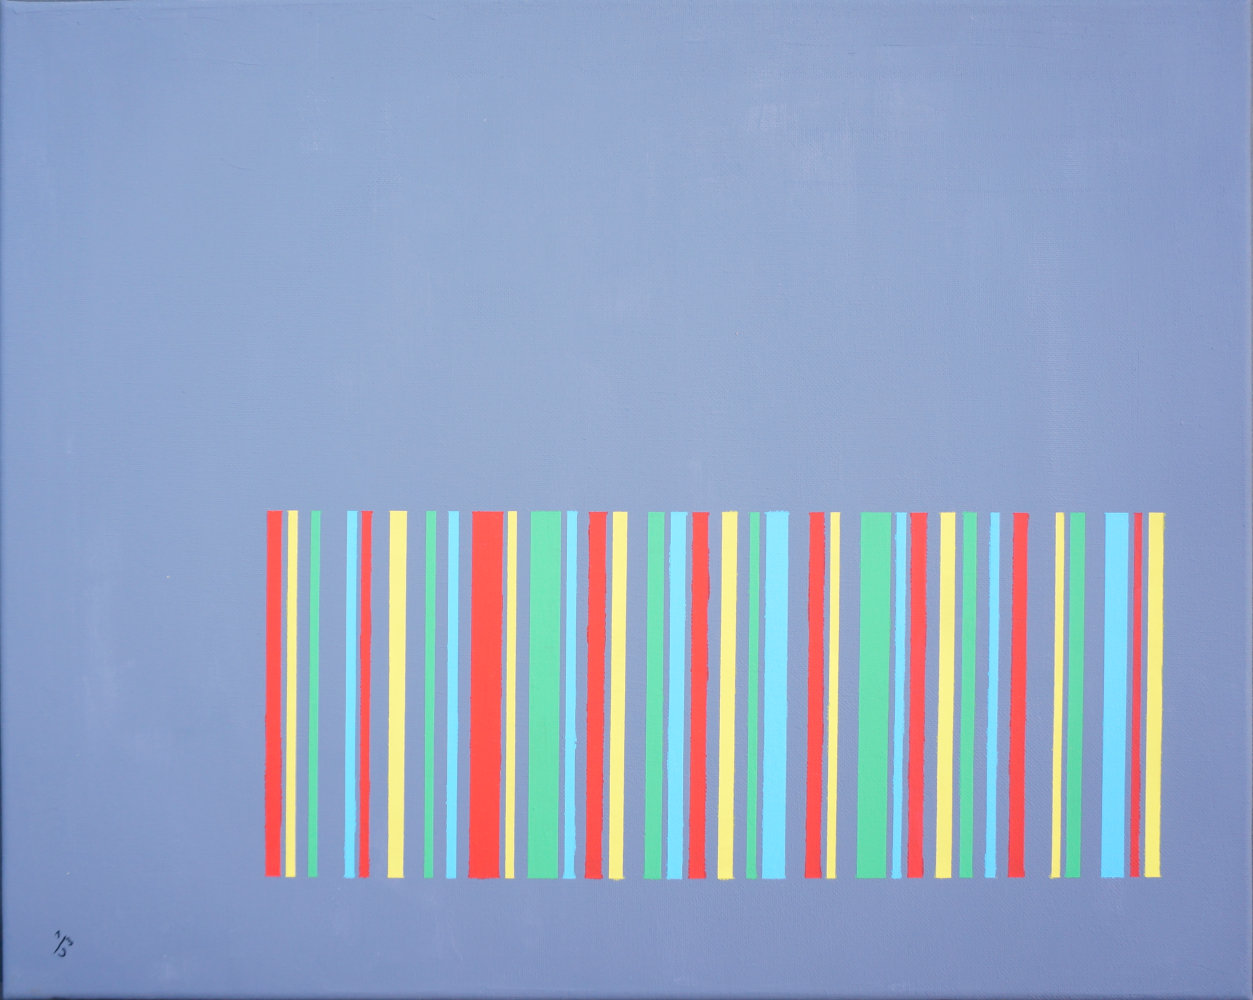 abstract acrylic painting, design in 3D construction program, execution in stencil technique, 2012. in front of a blue background there is a barcode-like arrangement of stripes in red, green and yellow. Scanning the barcode would give the title of the work.